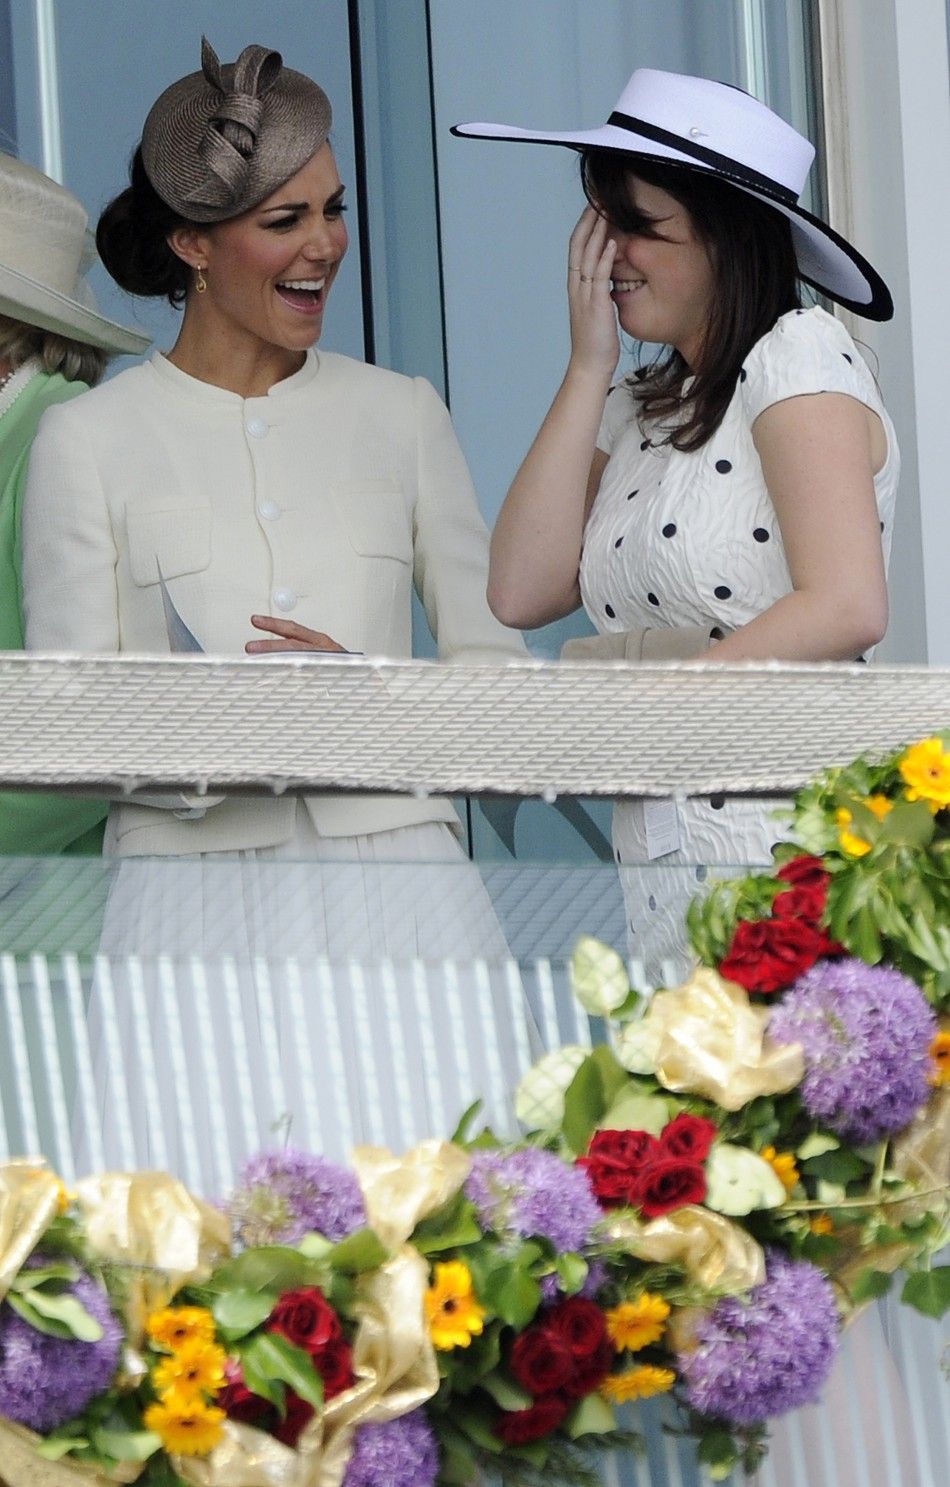 Catherine, Britains Duchess of Cambridge, jokes with Princess Eugenie as they attend Epsom Derby horse race at Epsom Racecourse in southern England